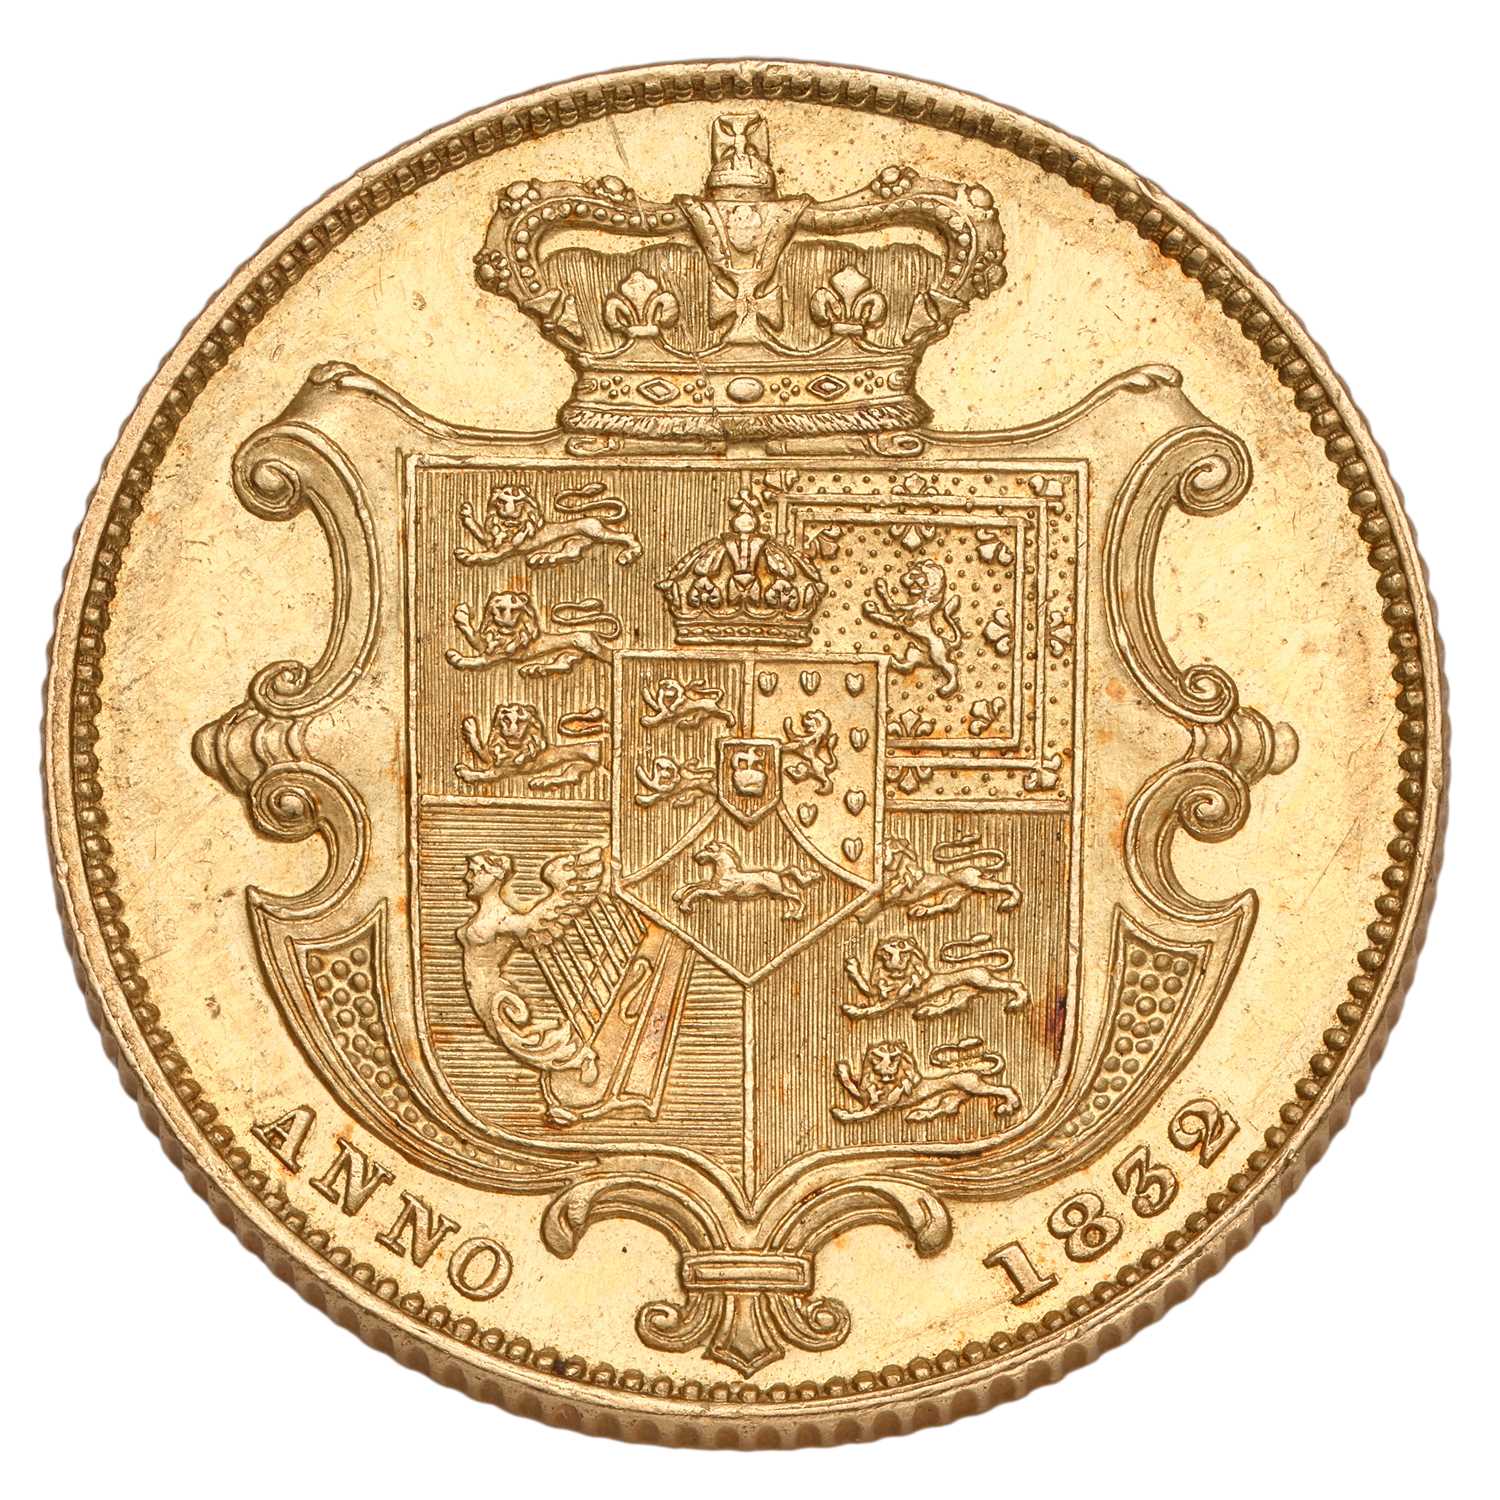 William IV, Sovereign 1832, first bust (Marsh 17A, S.3829) rated as extremely rare in Marsh; obverse - Image 2 of 2